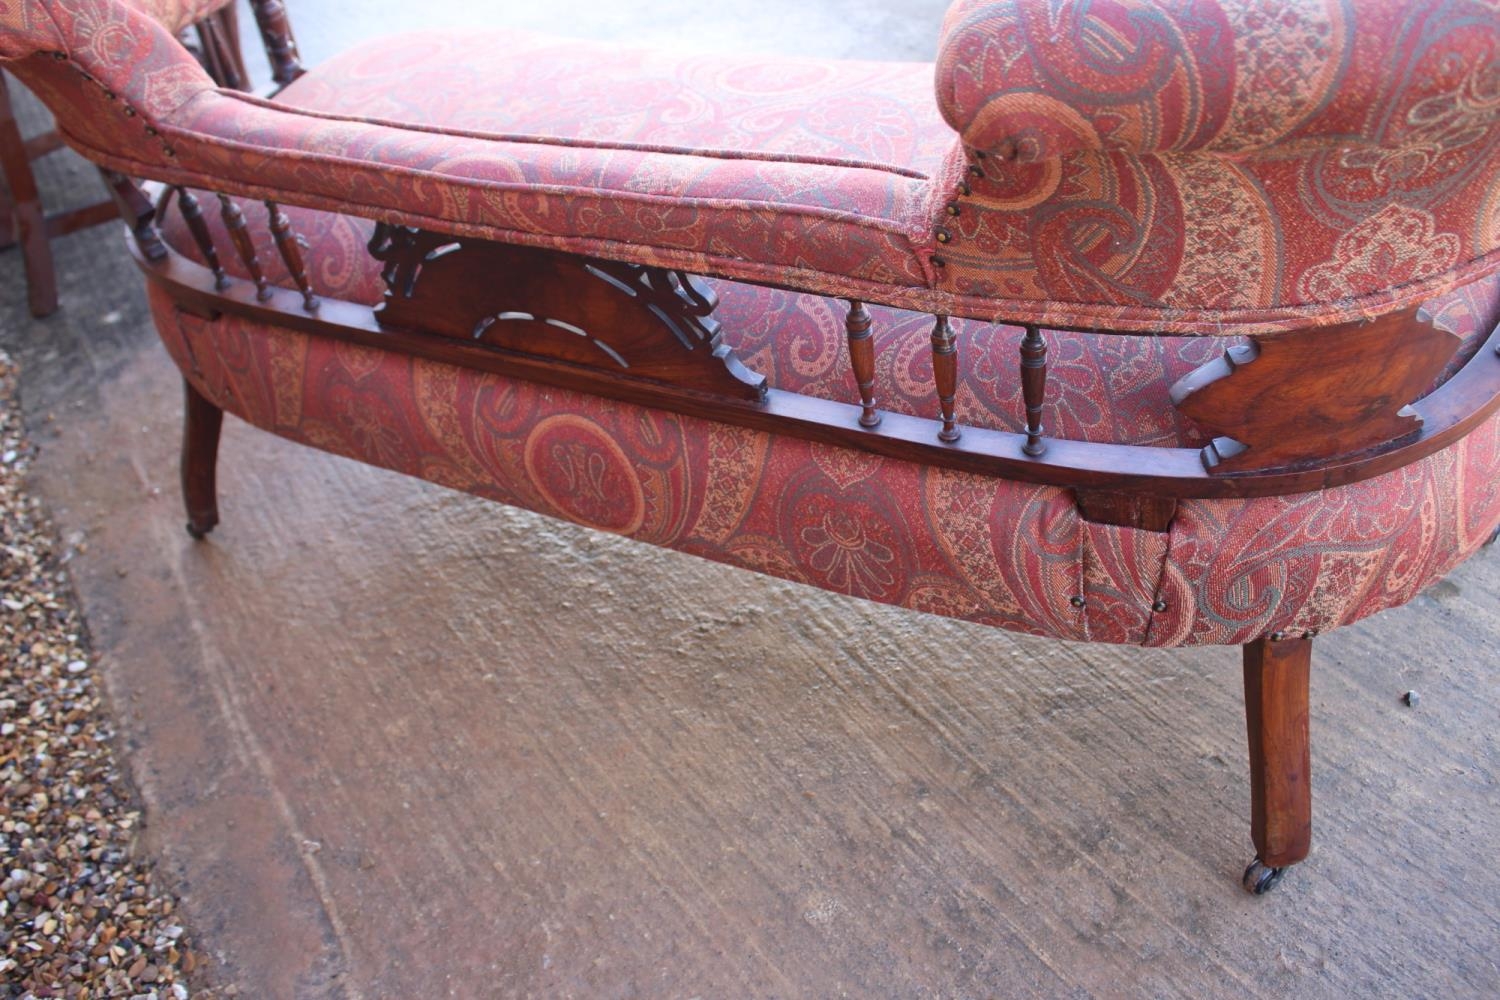 An early 20th century rosewood and line inlaid "conversation" settee with splat and spindle padded - Image 5 of 7